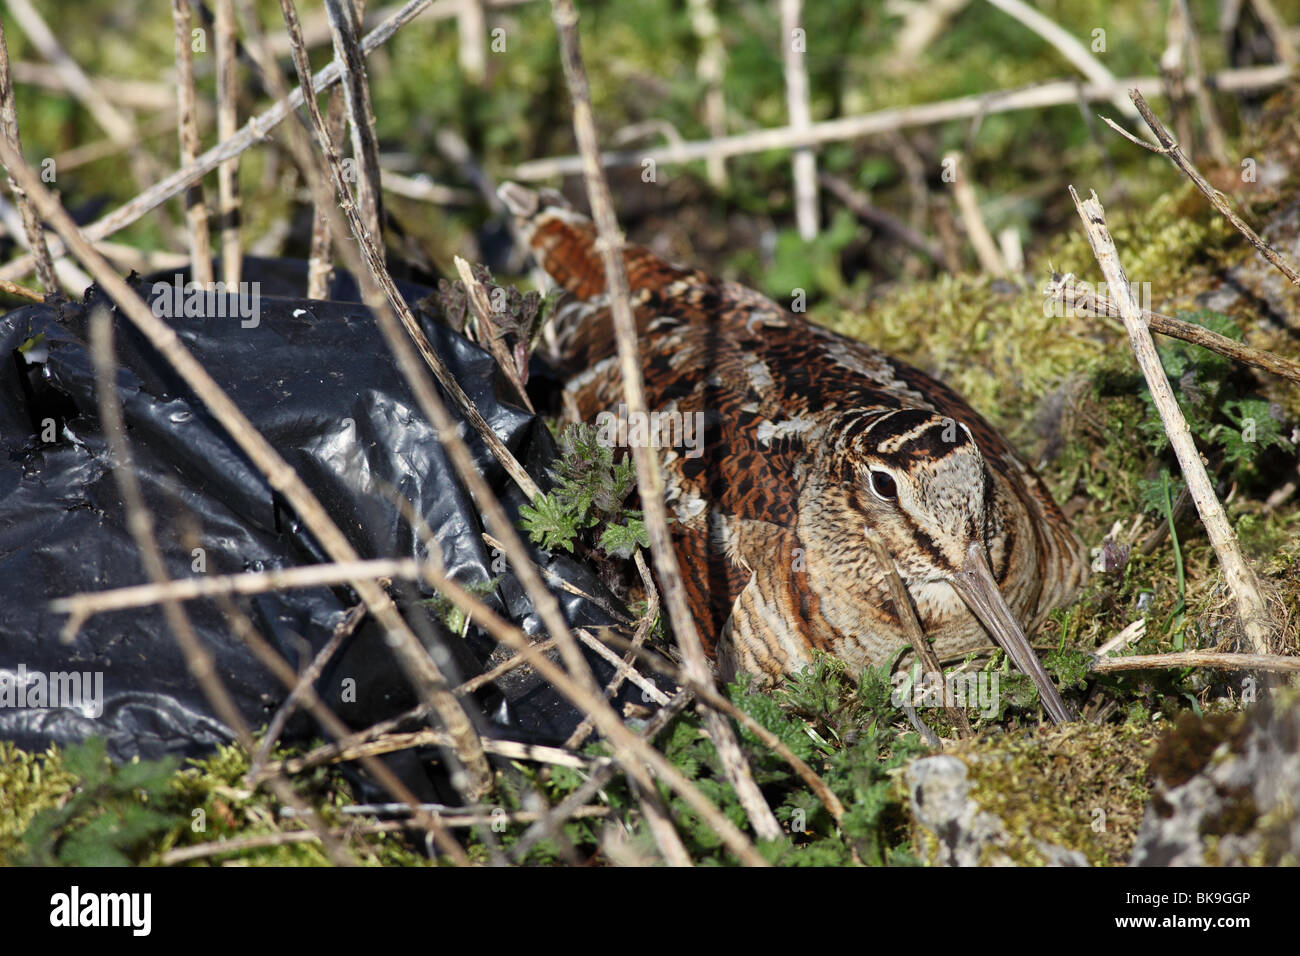 Woodcock Scolopax rusticola Nesting Next to a Discarded Black Plastic Bag Stock Photo